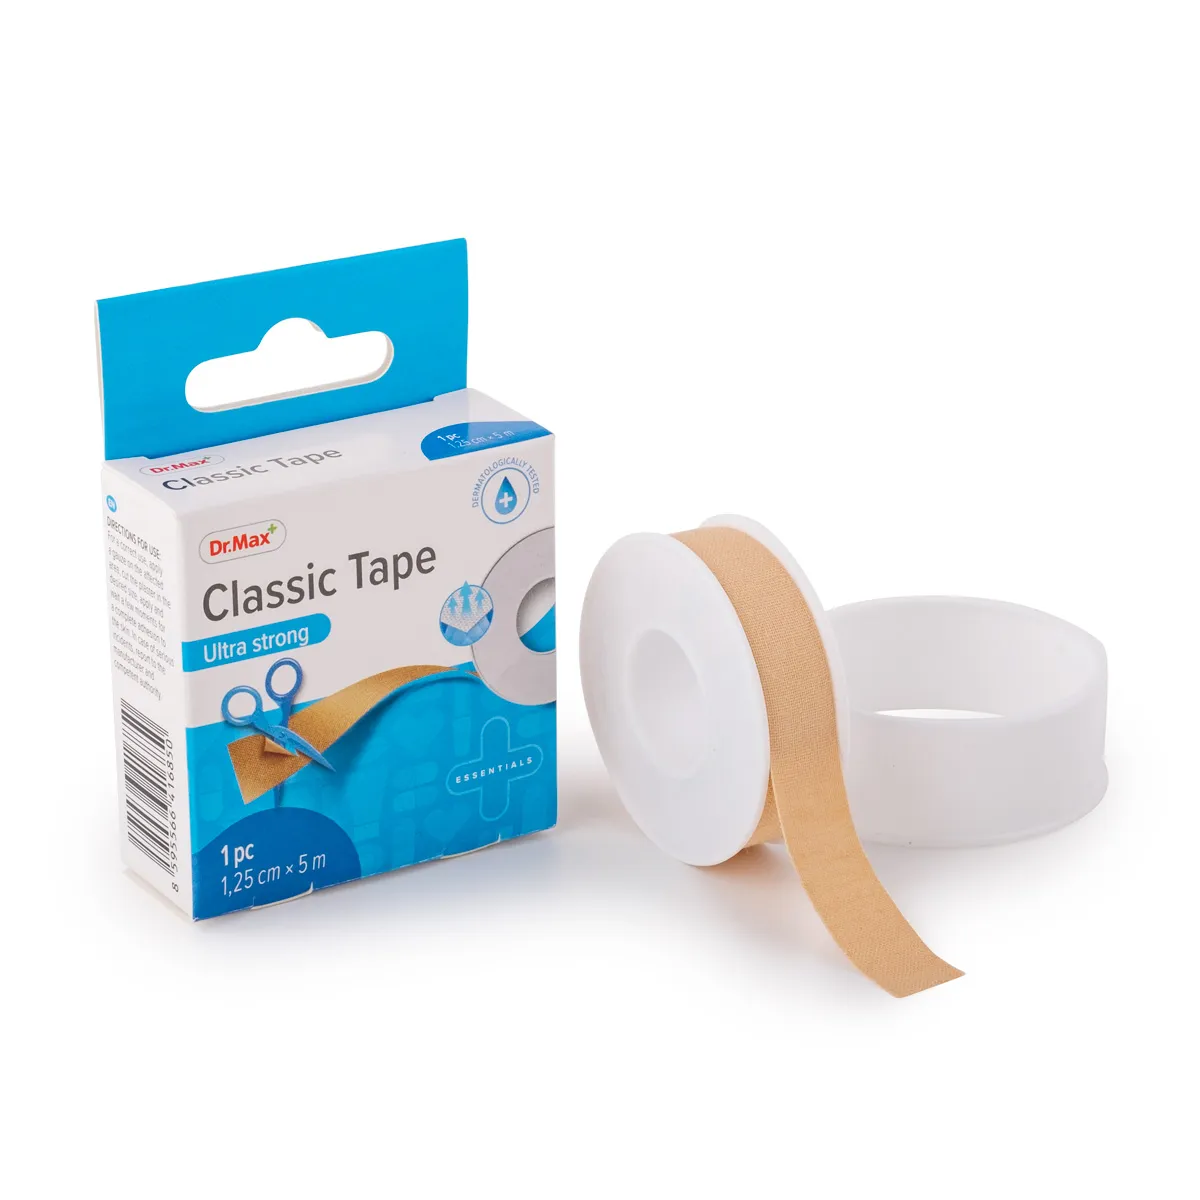 Dr.Max Classic Tape Ultra Strong 1,25 cm x 5 m Cerotto Ultra resistente